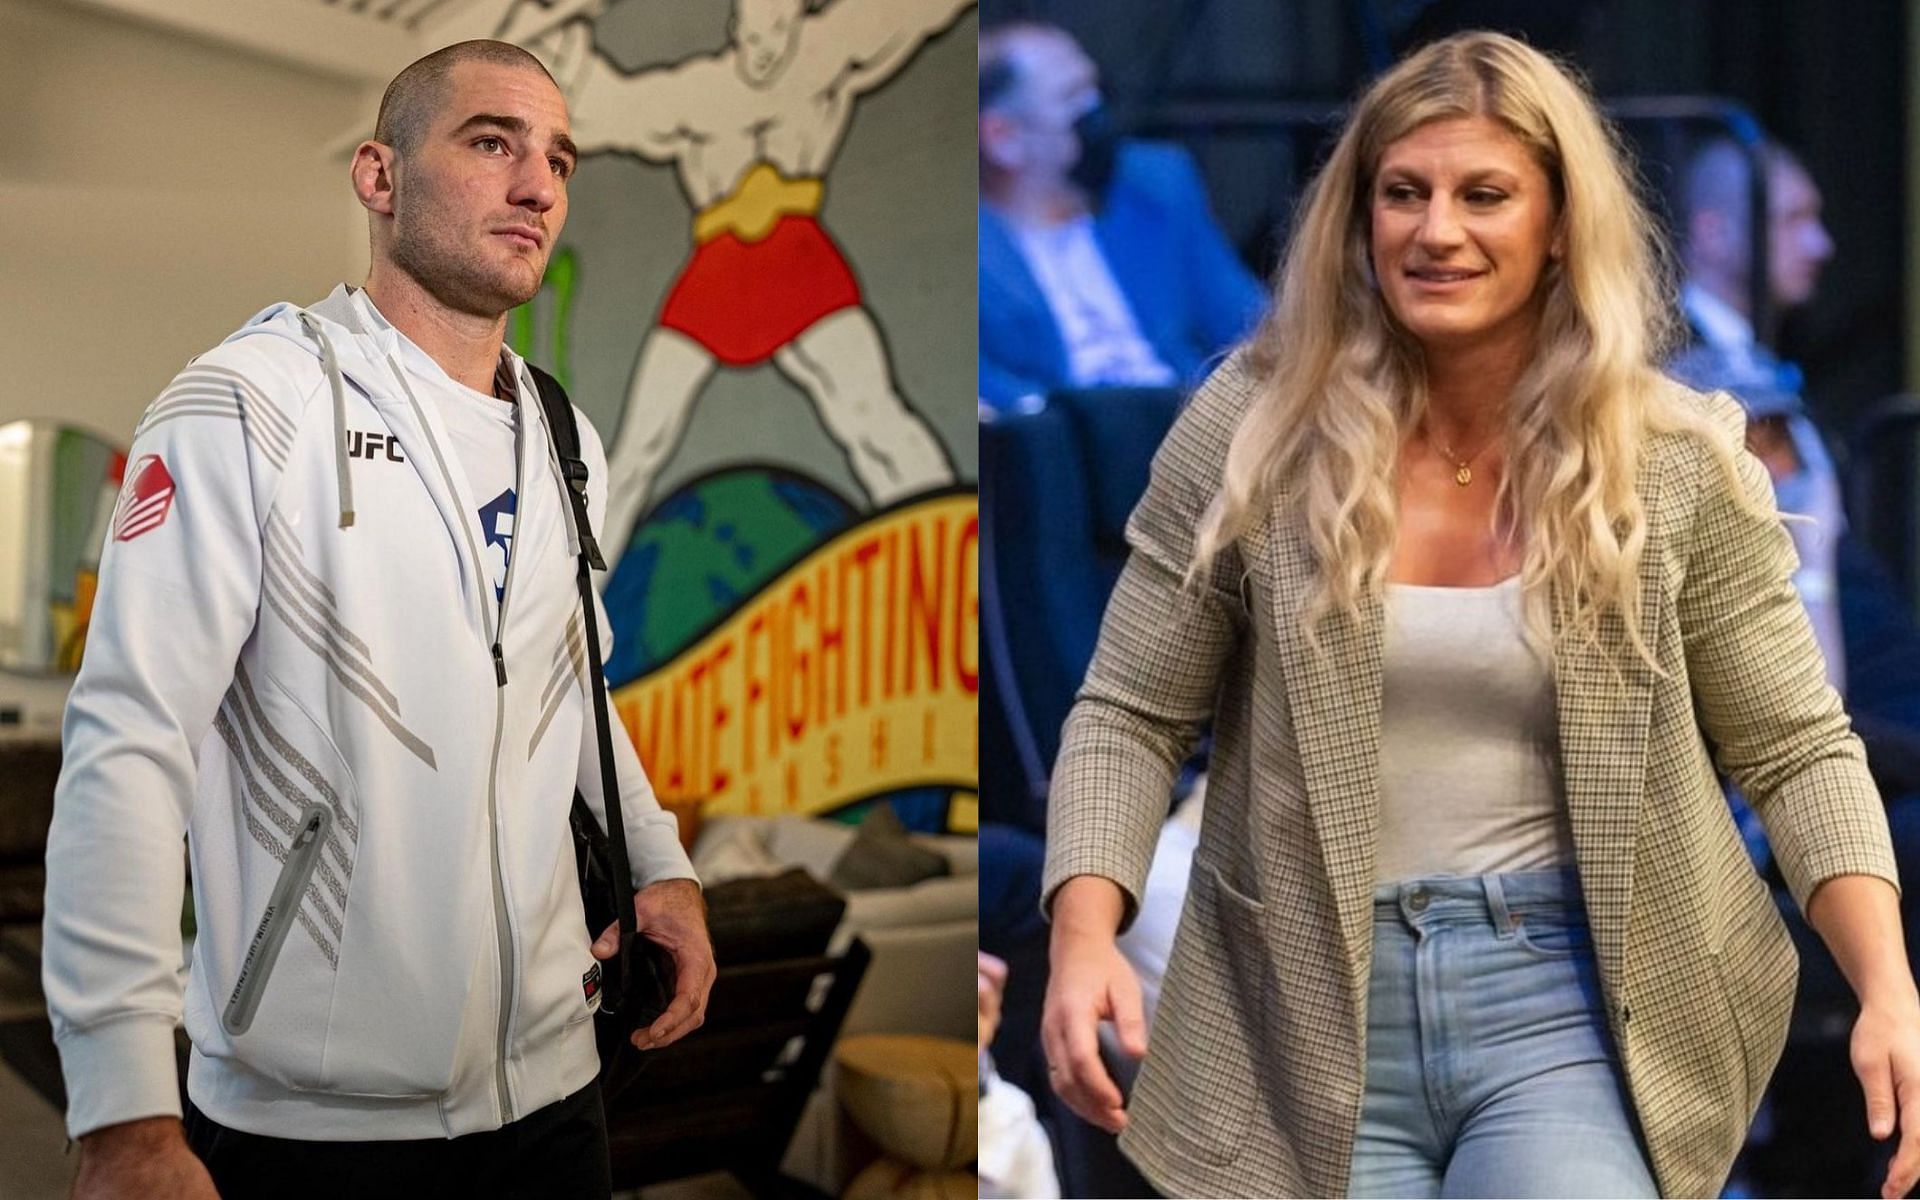 Sean Strickland (left) and Kayla Harrison (right) [Image Courtesy: @seanstrickland_mma and @judokayla on Instagram]